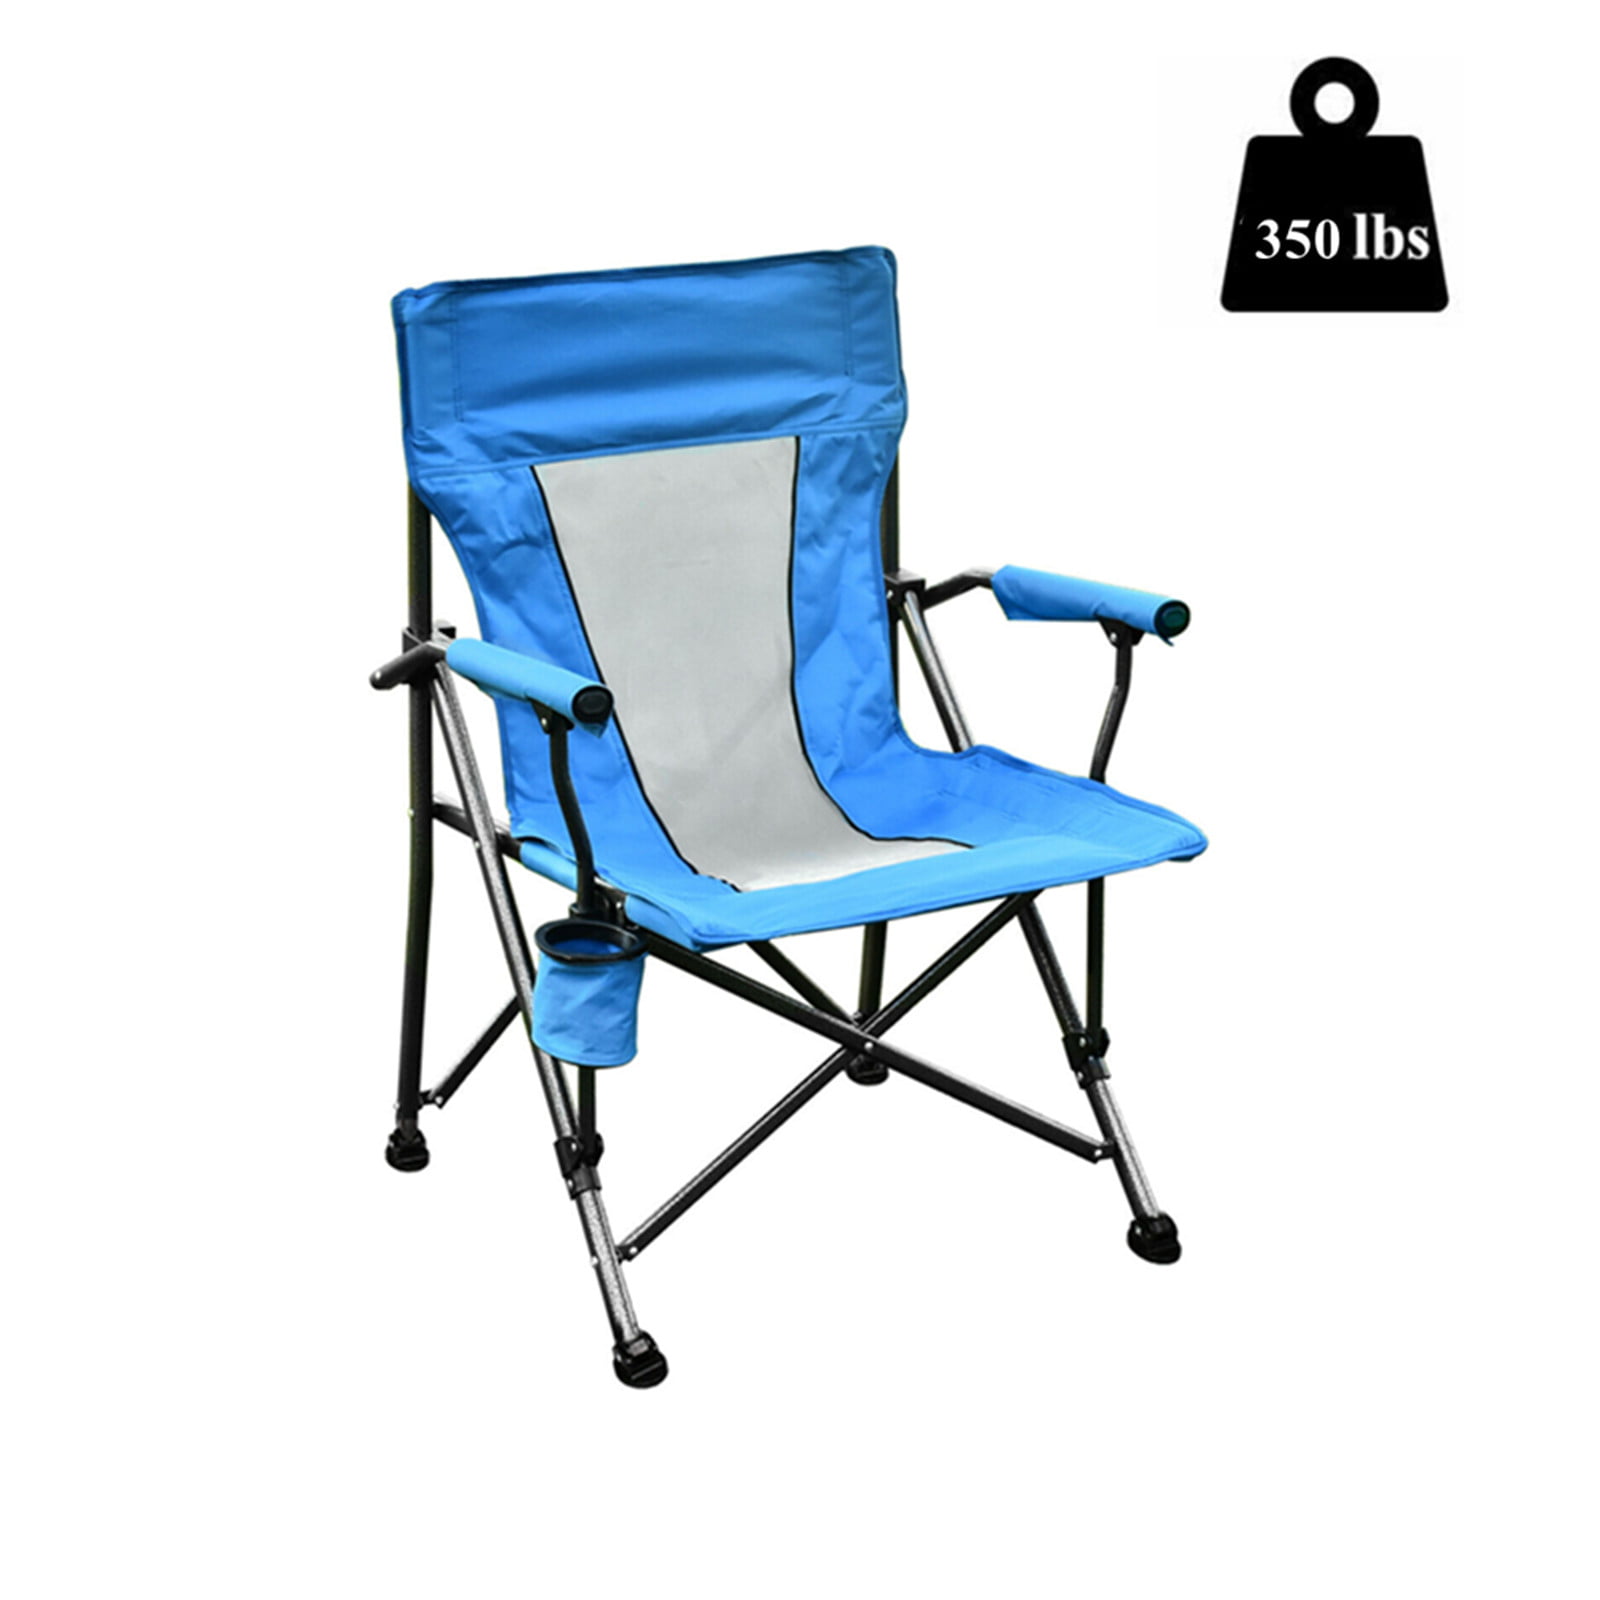 Heavy Duty Camping Chair Luxury Padded Folding High Back Directors w/ Cup Holder 